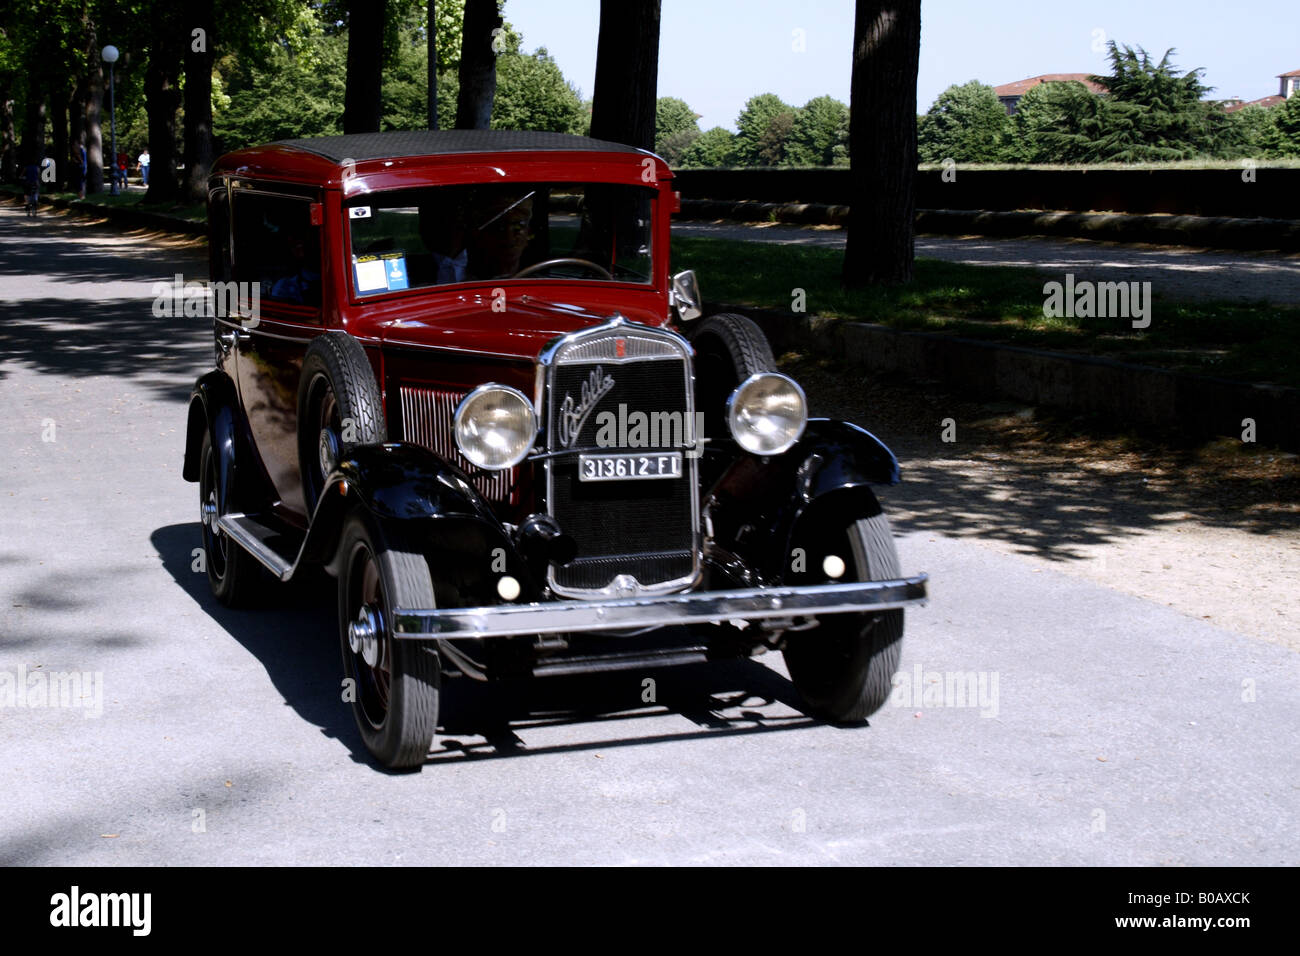 Vecchie Auto Lancia Old Car High Resolution Stock Photography And Images Alamy